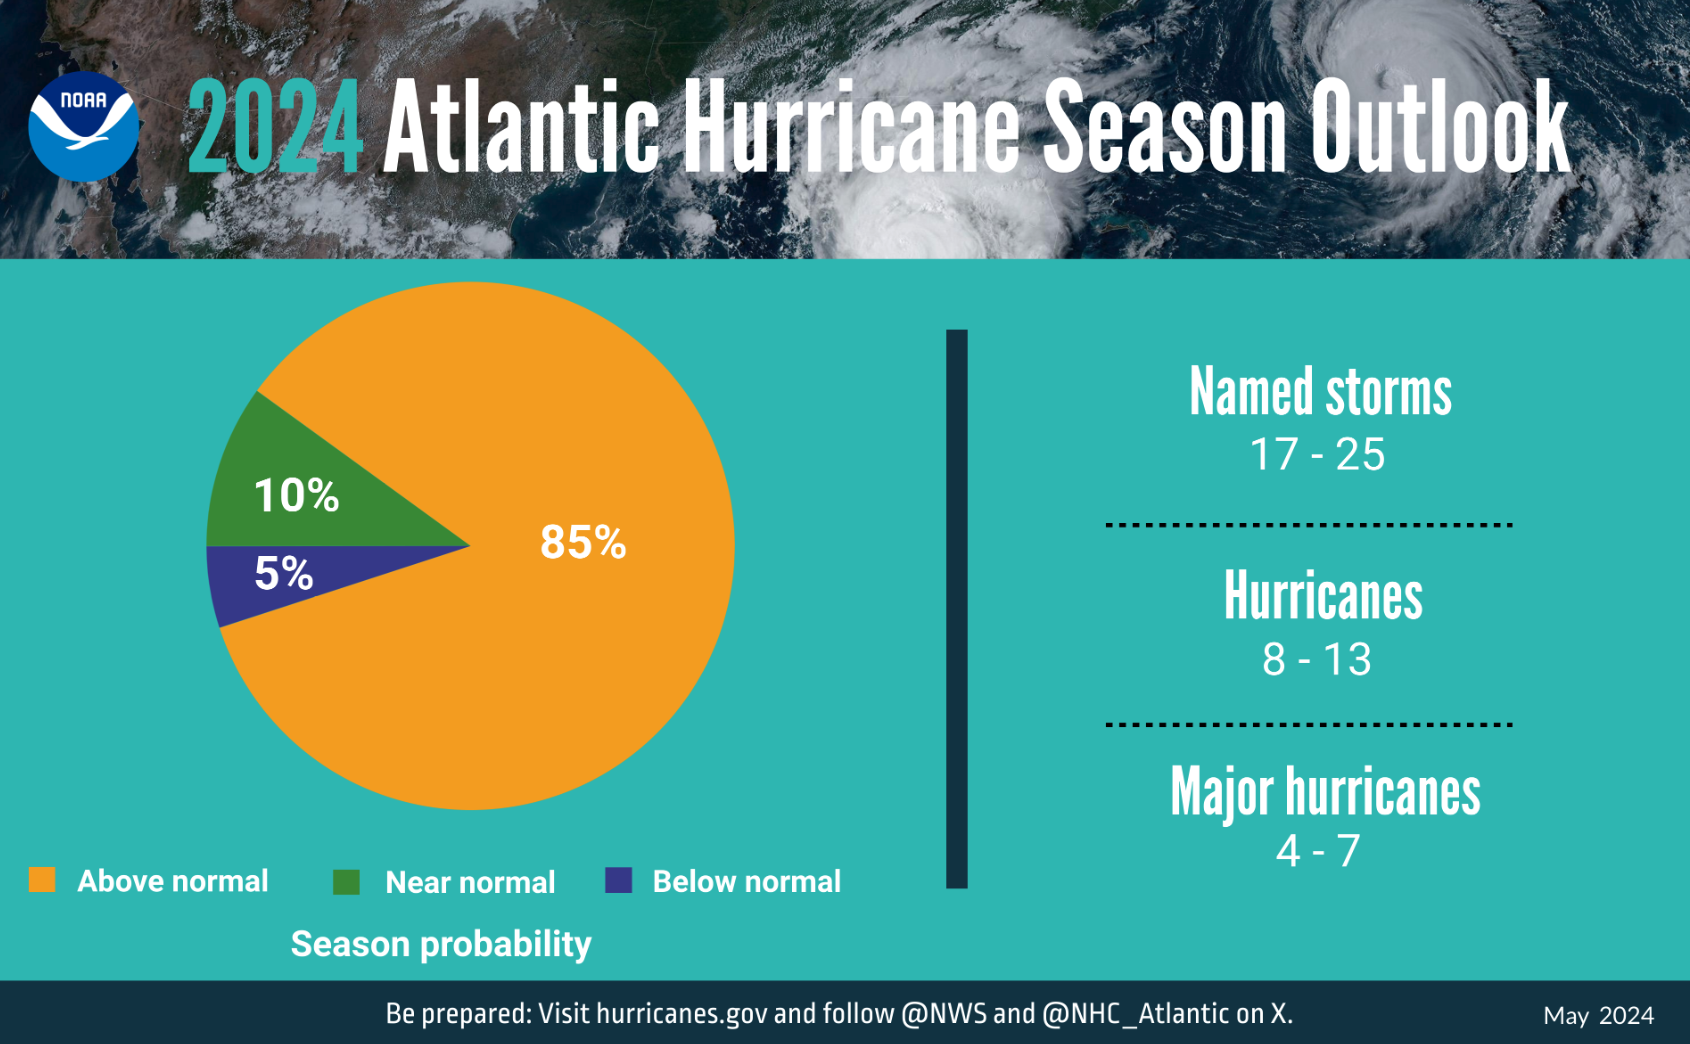 A summary infographic showing hurricane season probability and numbers of named storms predicted from NOAA's 2024 Atlantic Hurricane Season Outlook. (Image credit: NOAA)